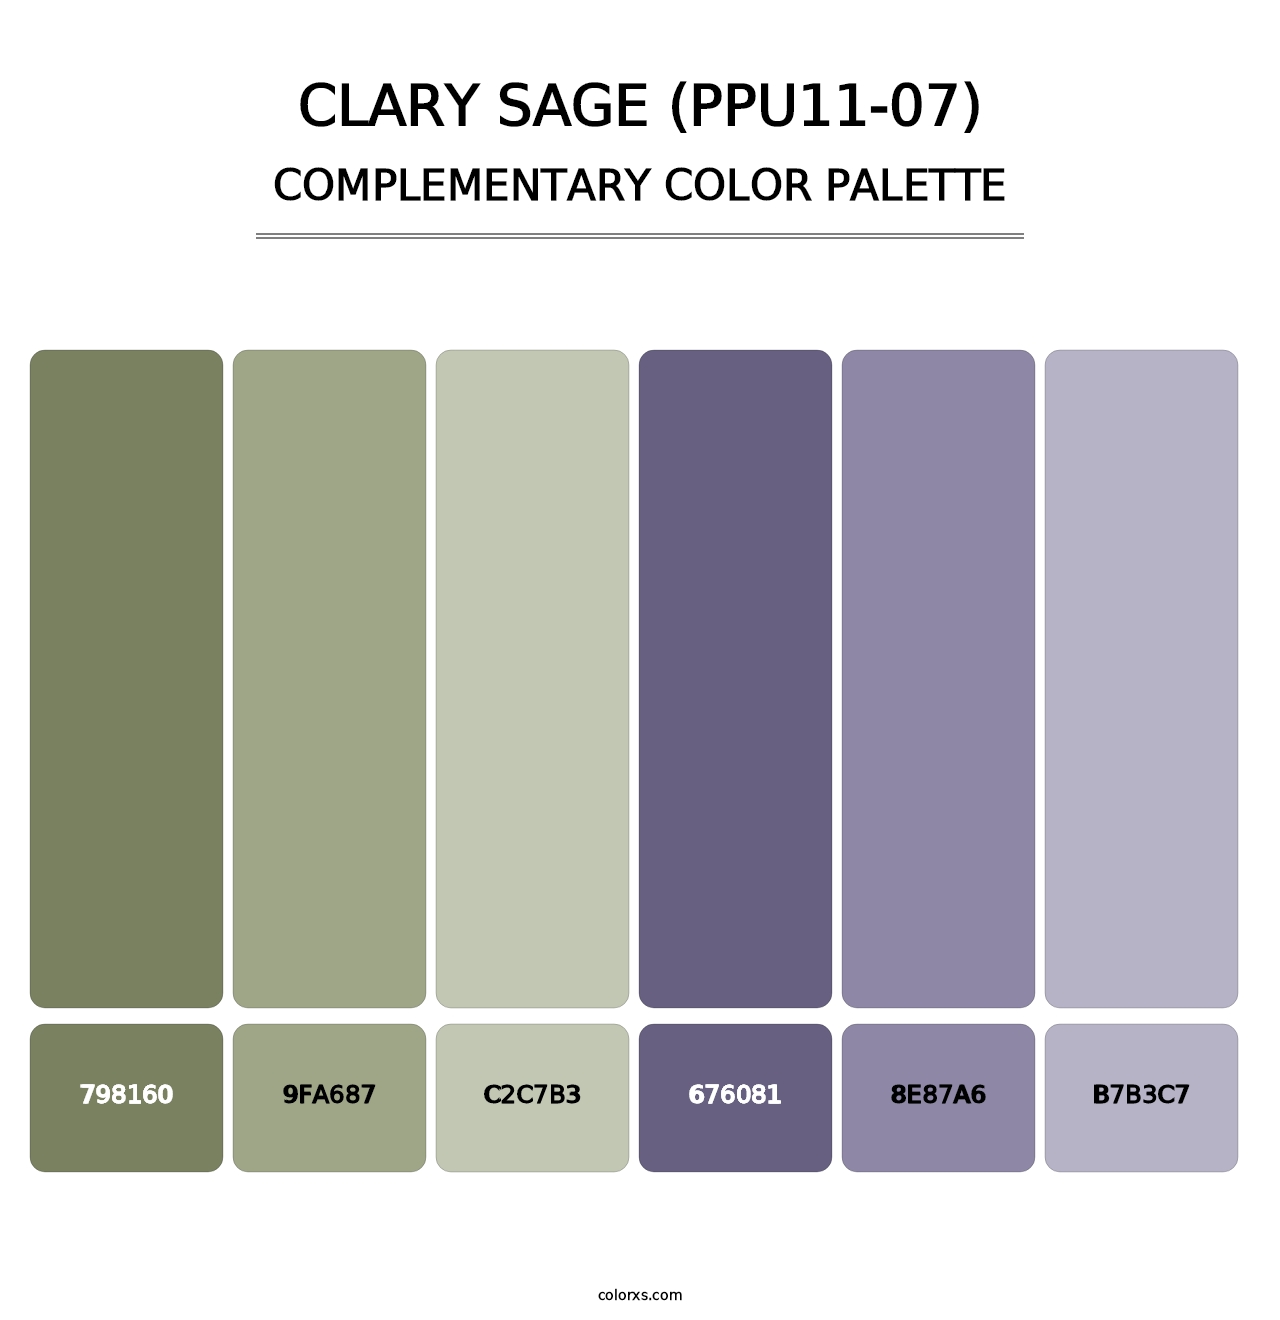 Clary Sage (PPU11-07) - Complementary Color Palette